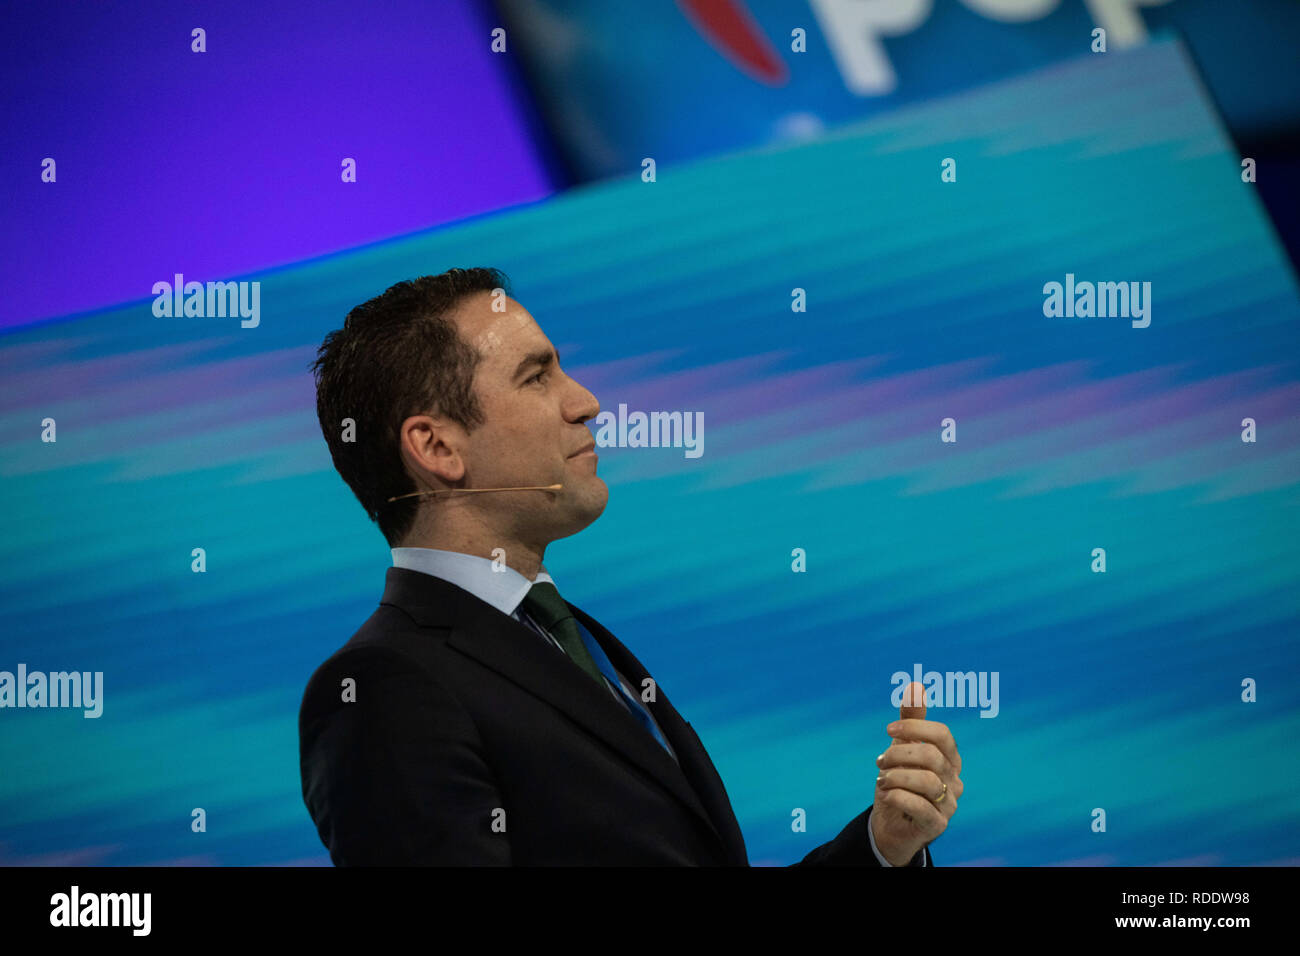 January 18, 2019 - Madrid, Spain - Teodoro GarcÃa Egea, Secretary General of the Popular Party. The PP celebrates its national convention to establish the main lines of its electoral program for the three elections scheduled for May 26 and are key to gauge the leadership of the popular president, Pablo Casado. (Credit Image: © Jesus Hellin/ZUMA Wire) Stock Photo